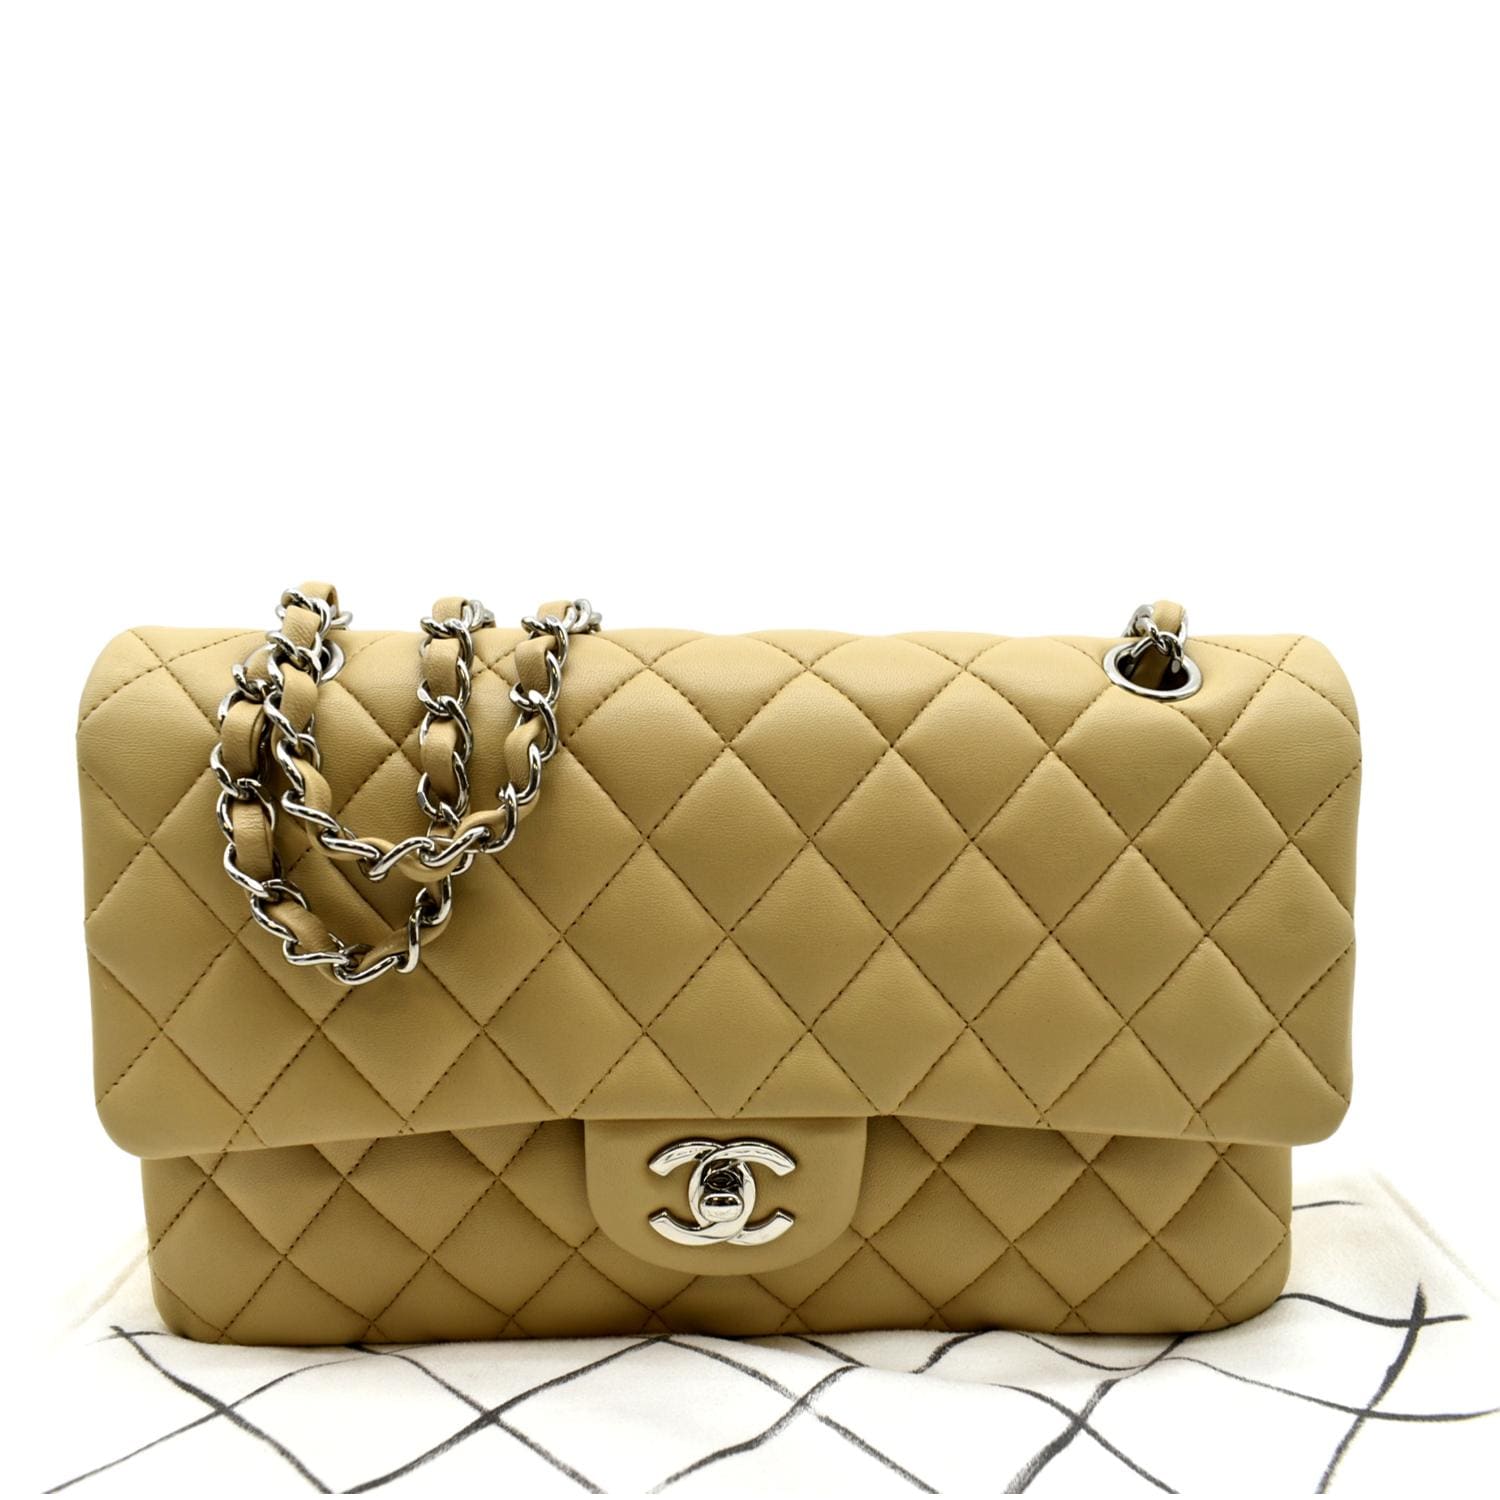 Chanel Tan Quilted Leather Medium Classic Double Flap Bag Chanel